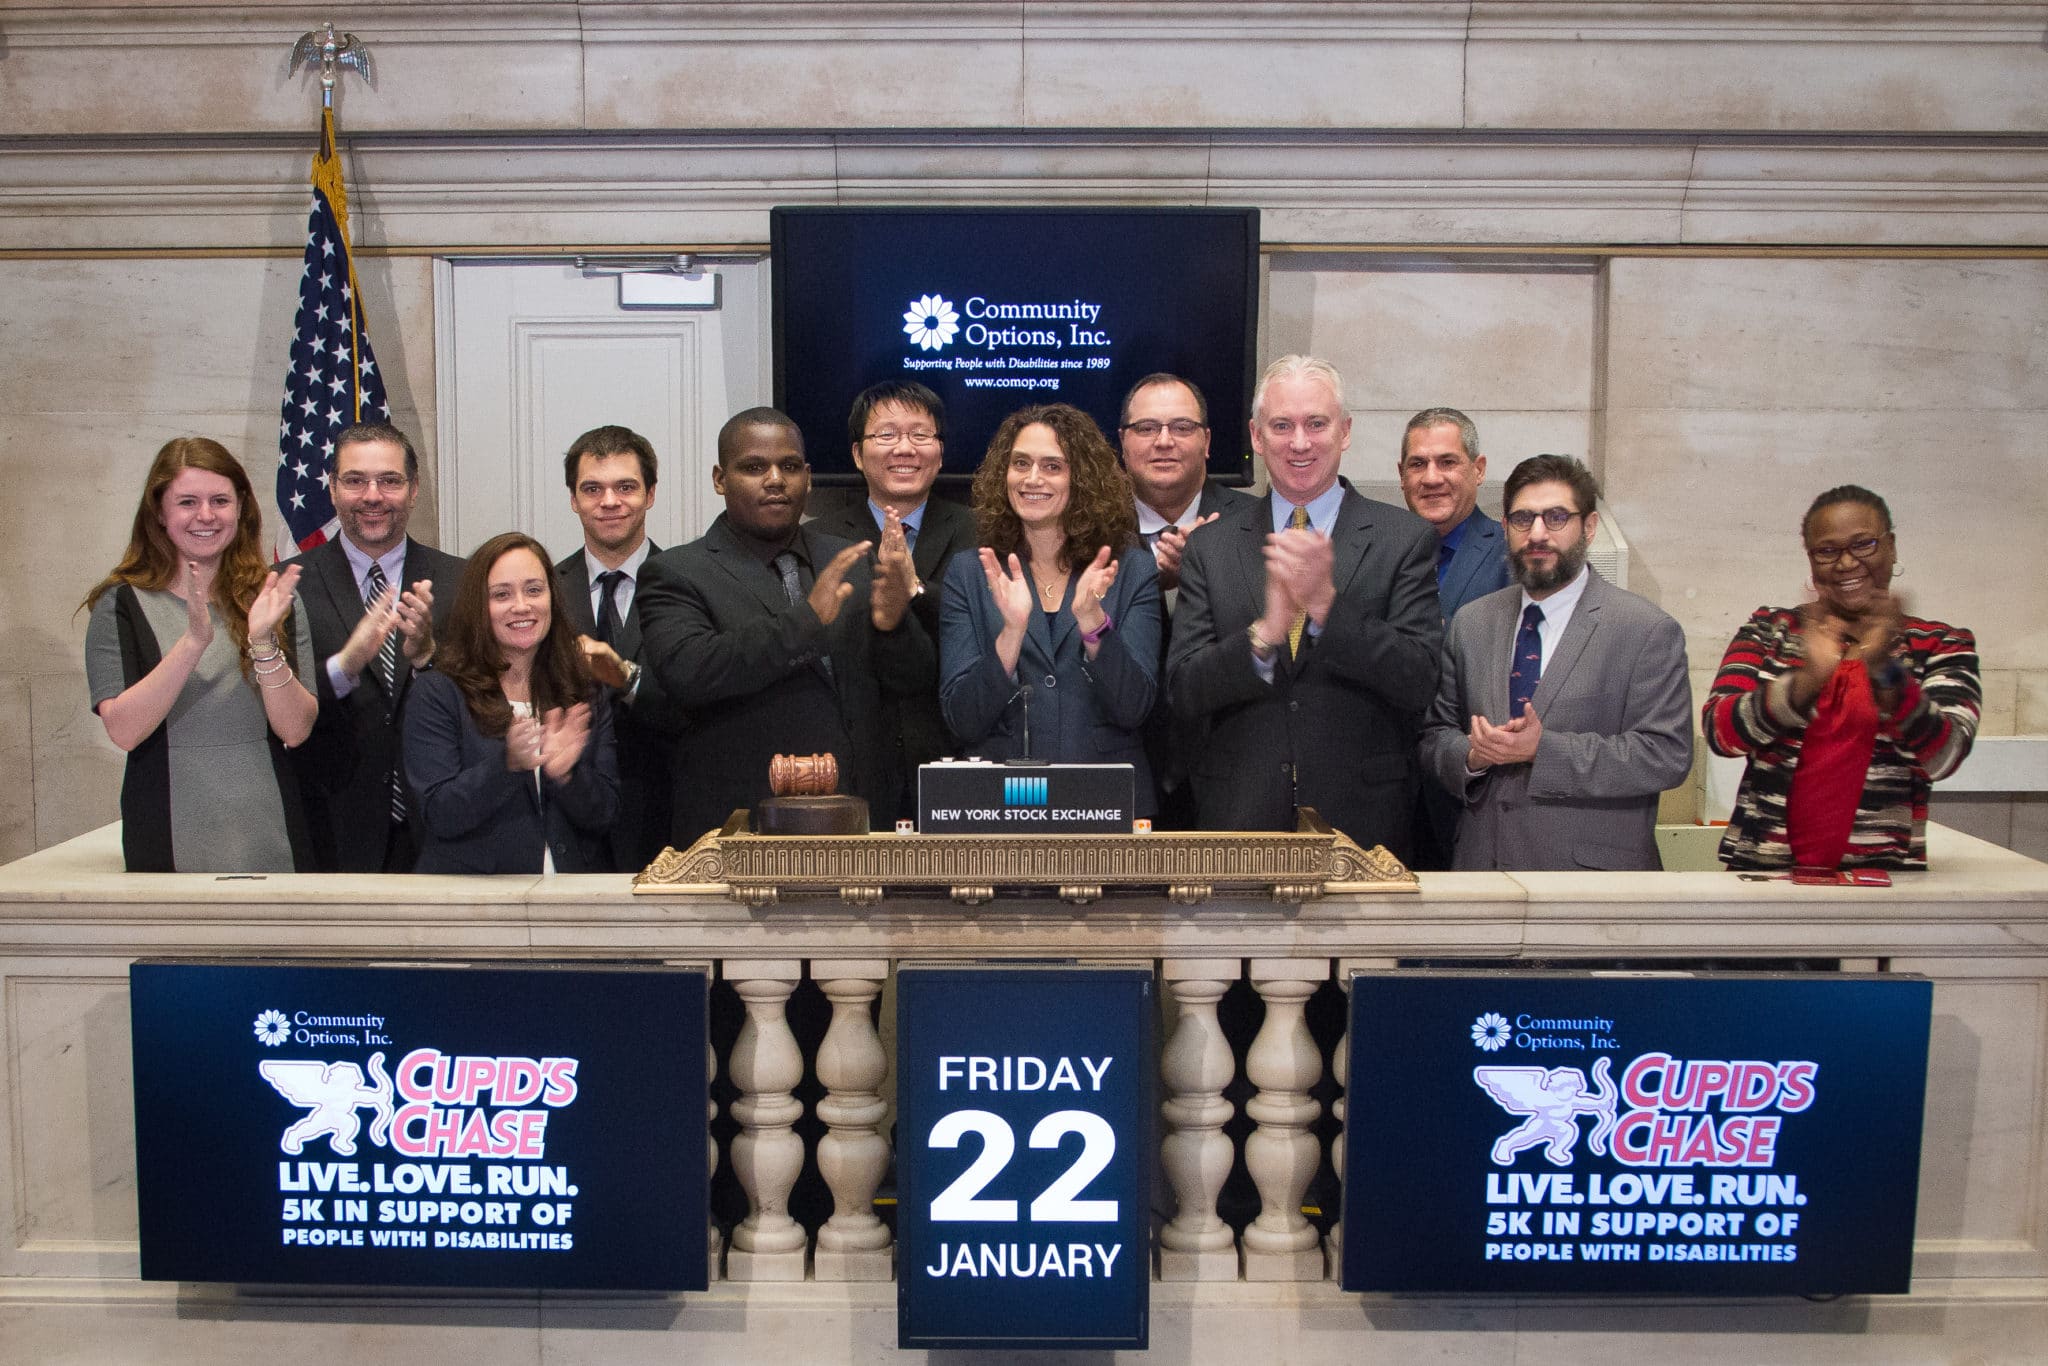 Robert Stack, President of Community Options, Inc., selected Roy King to ring the opening bell at the New York Stock Exchange, Friday January 22, 2016.